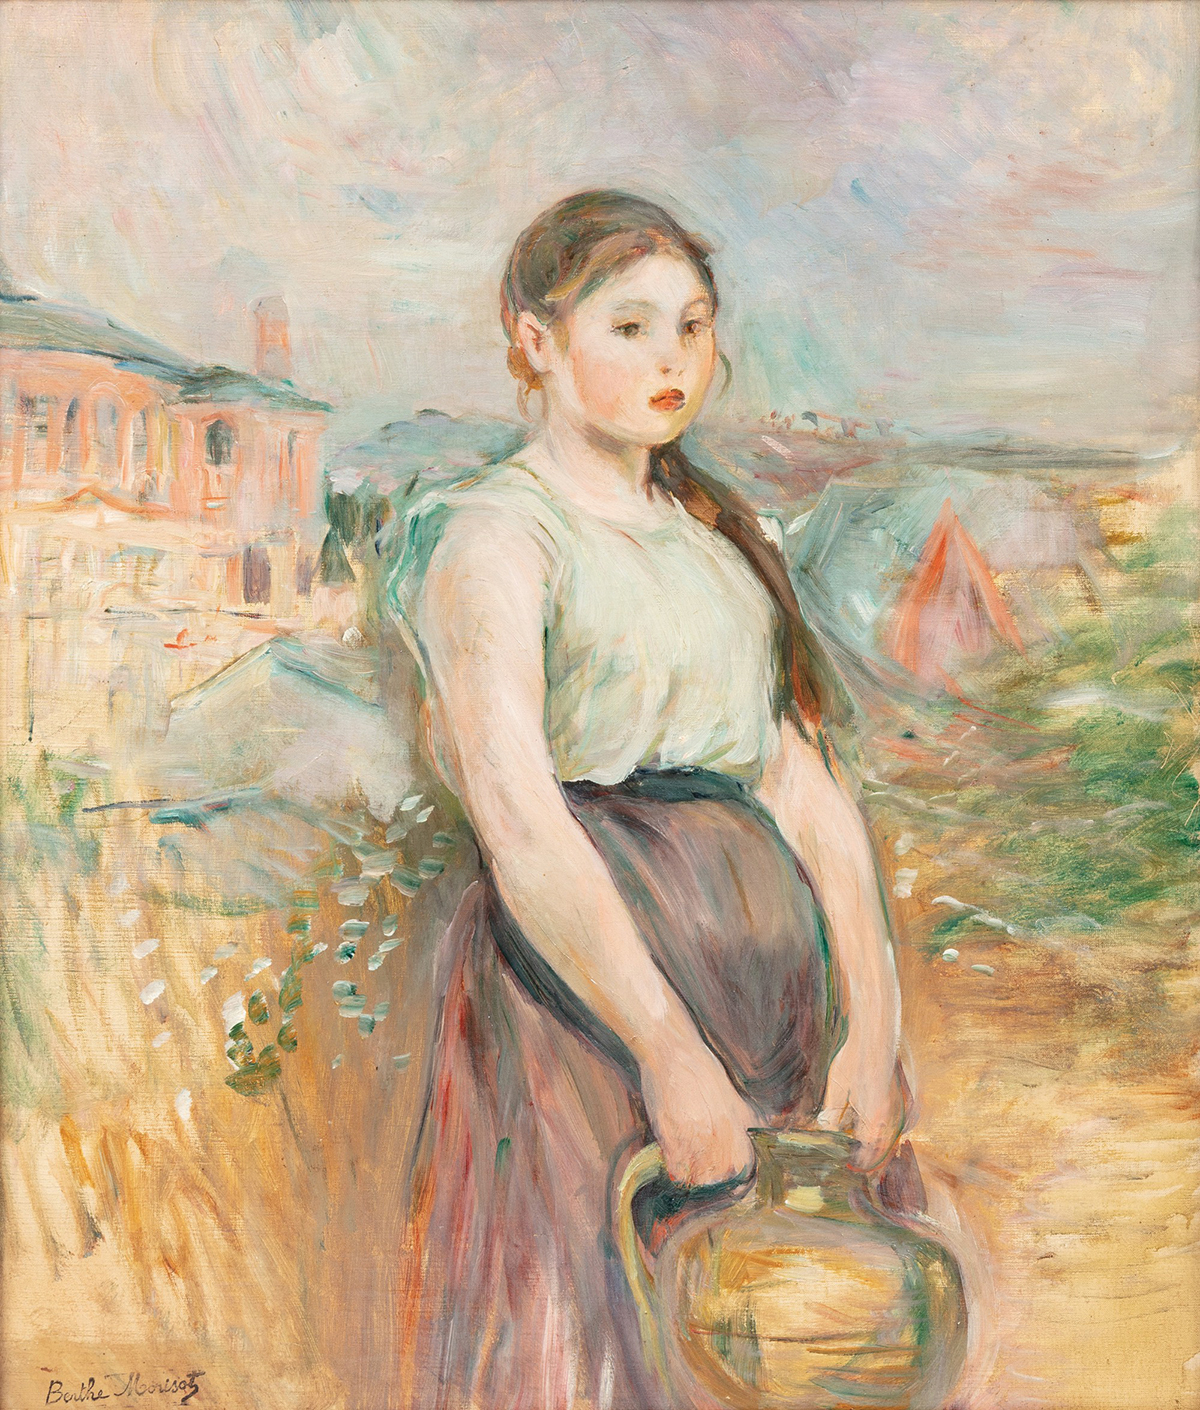 Painting of a woman holding a large jug in front of a landscape with a building to her left.